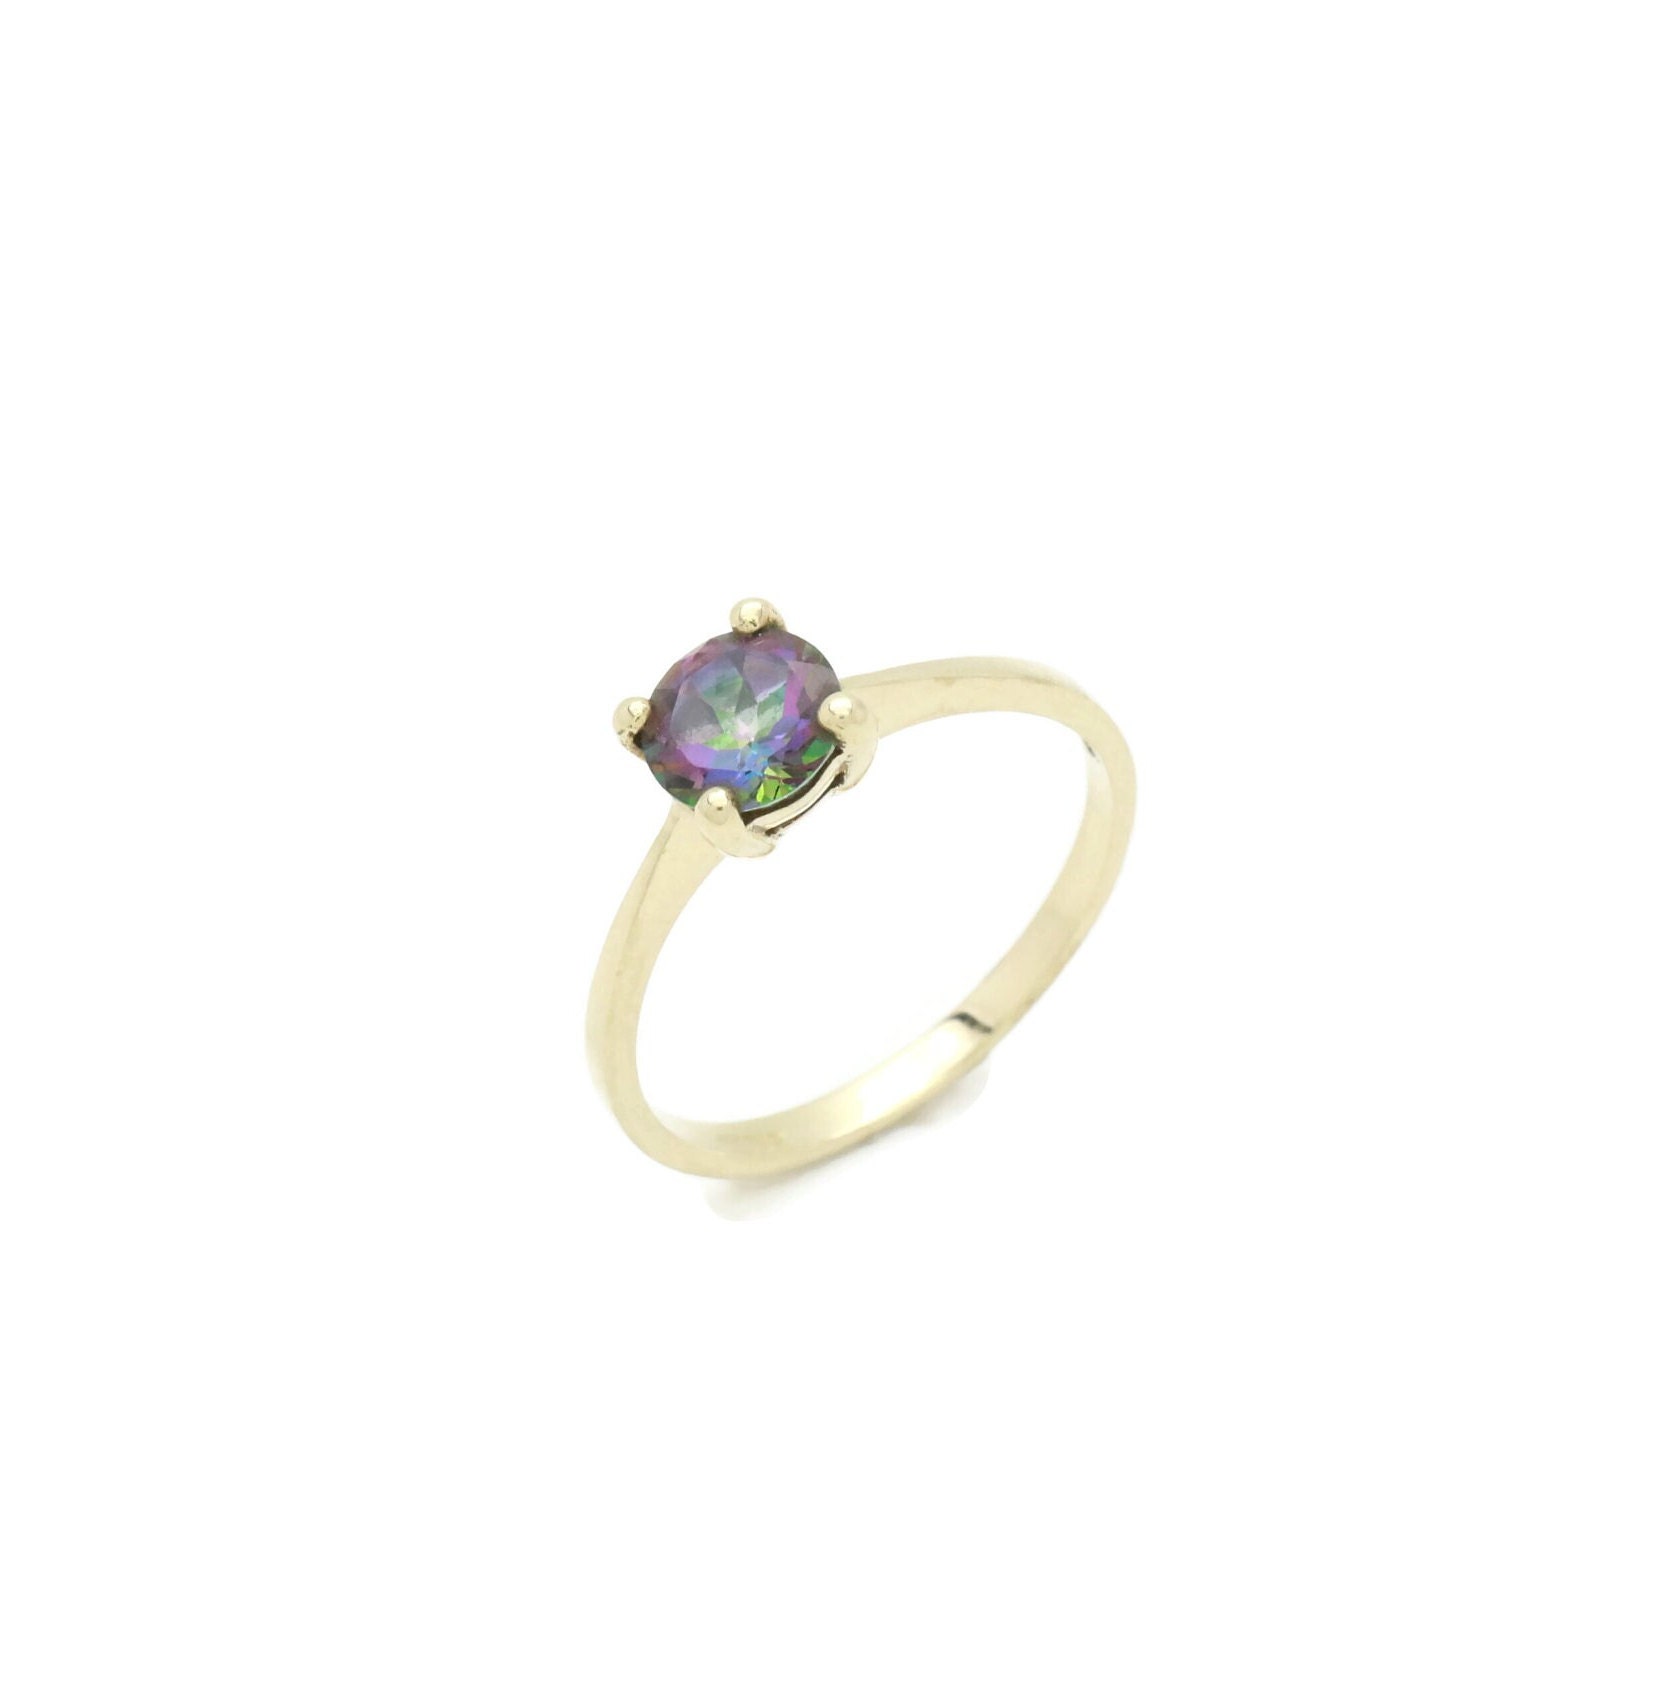 Relative broadcast Syndicate Mystic Topaz Ring Mystic Topaz Jewellery Solitaire Mystic - Etsy